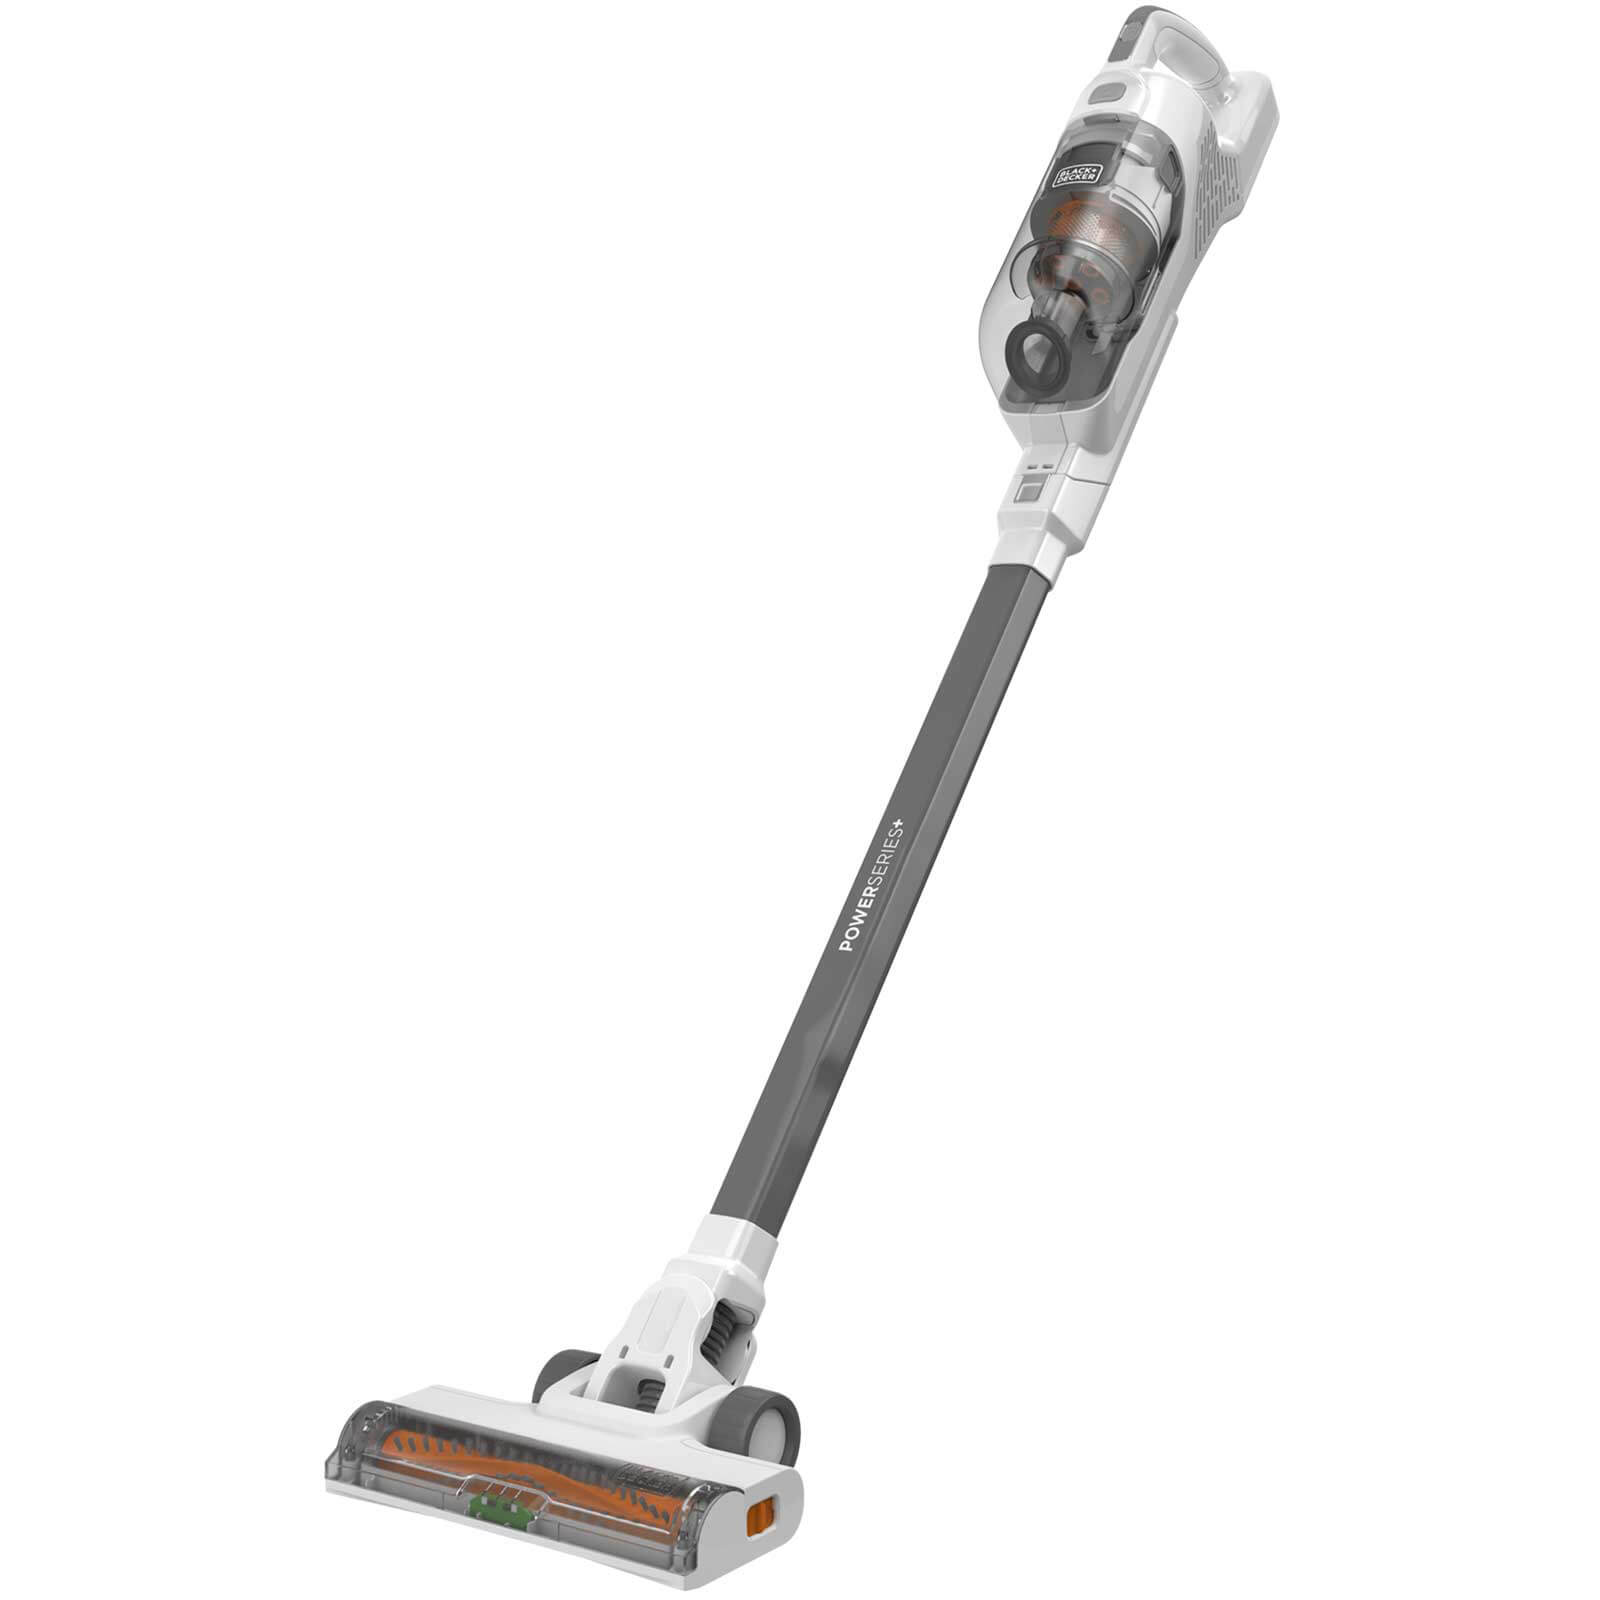 Black and Decker BHFEA515J 18V Cordless Powerseries Stick Vacuum Cleaner 1 x 1.5ah Integrated Li-ion Charger No Case